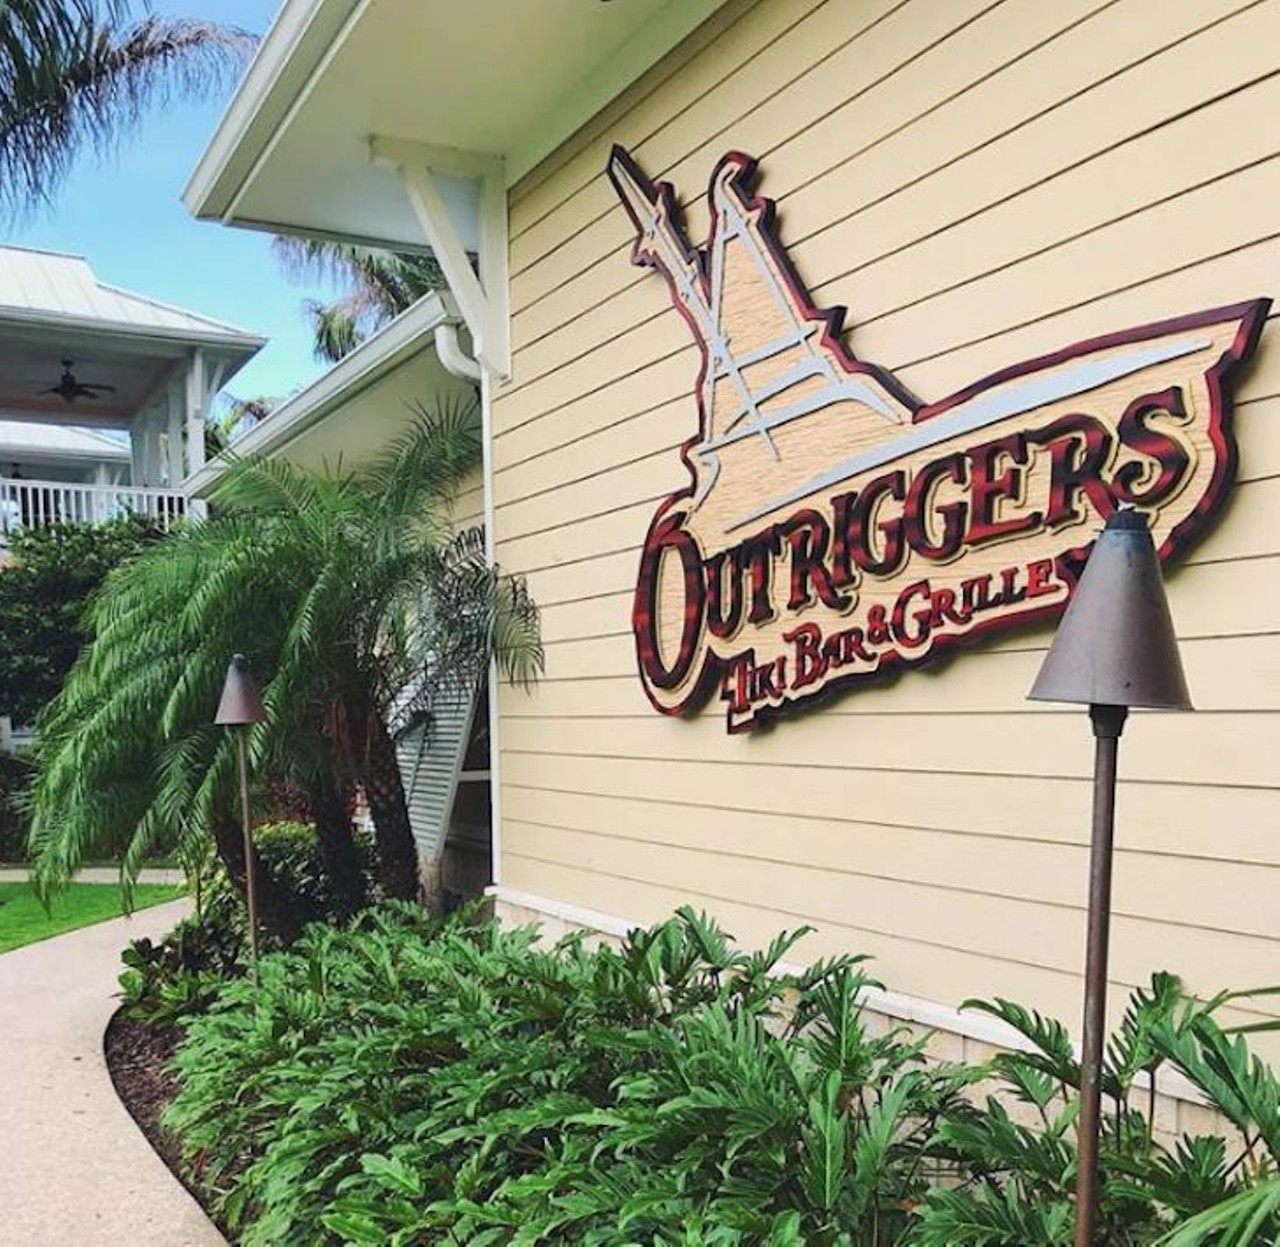 
Outriggers Tiki Bar and Grille
200 Boat Yard St, New Smyrna Beach; 386-428-6888
Get the full oceanside experience at this seafood restaurant on the New Smyrna Marina. Outriggers prides itself on being one of the only restaurants in Central Florida that has a license to buy fresh fish from the docks. They also provide an &#147;extensive drinks menu.&#148;
Photo via Outriggers Tiki Bar and Grille/Facebook